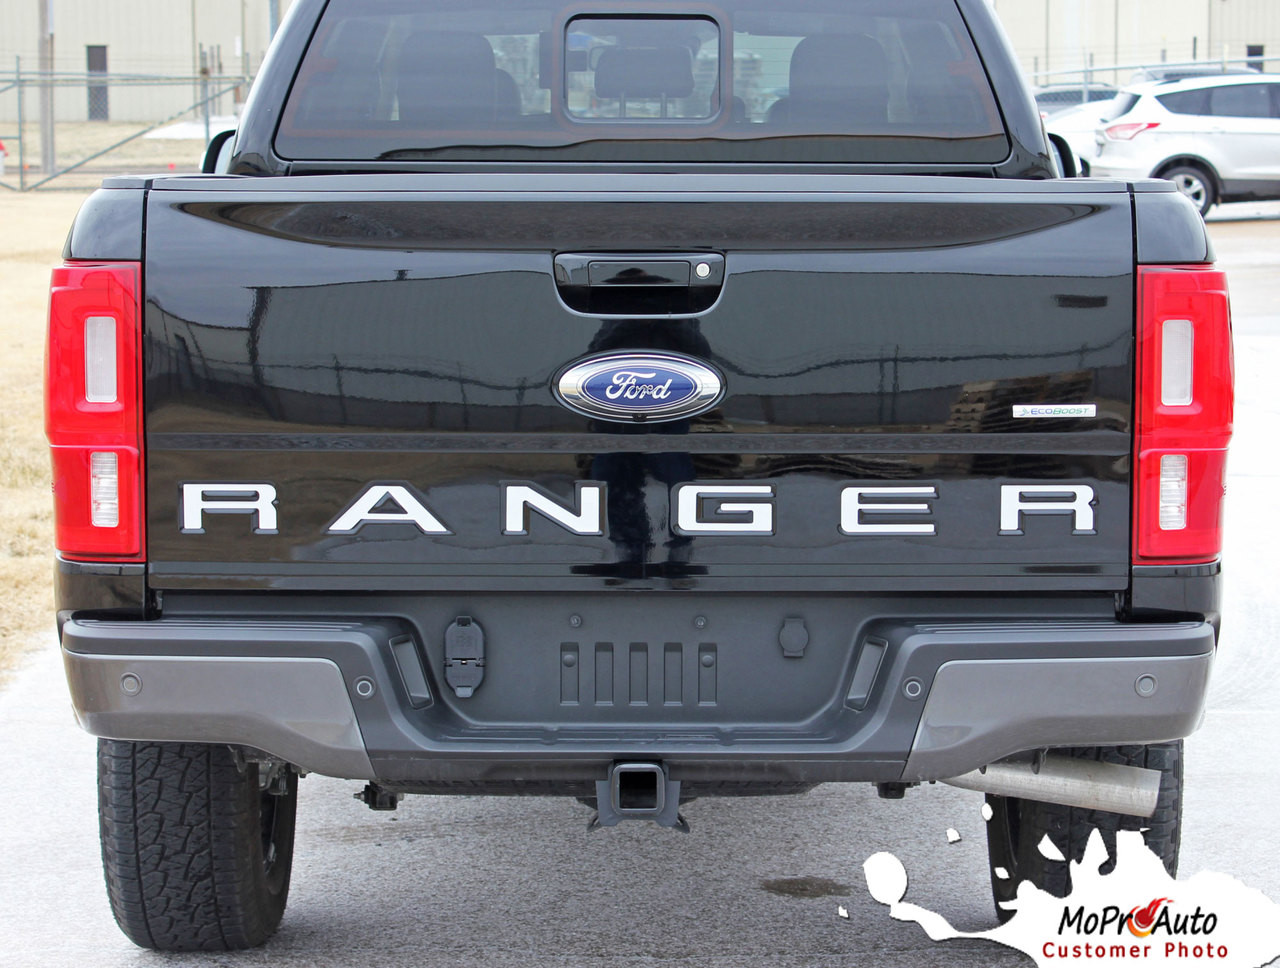 2019 2020 2021 2022 Ford  Ranger REAR TAILGATE LETTERS Vinyl Graphics and Decals Kit - MoProAuto Pro Design Series